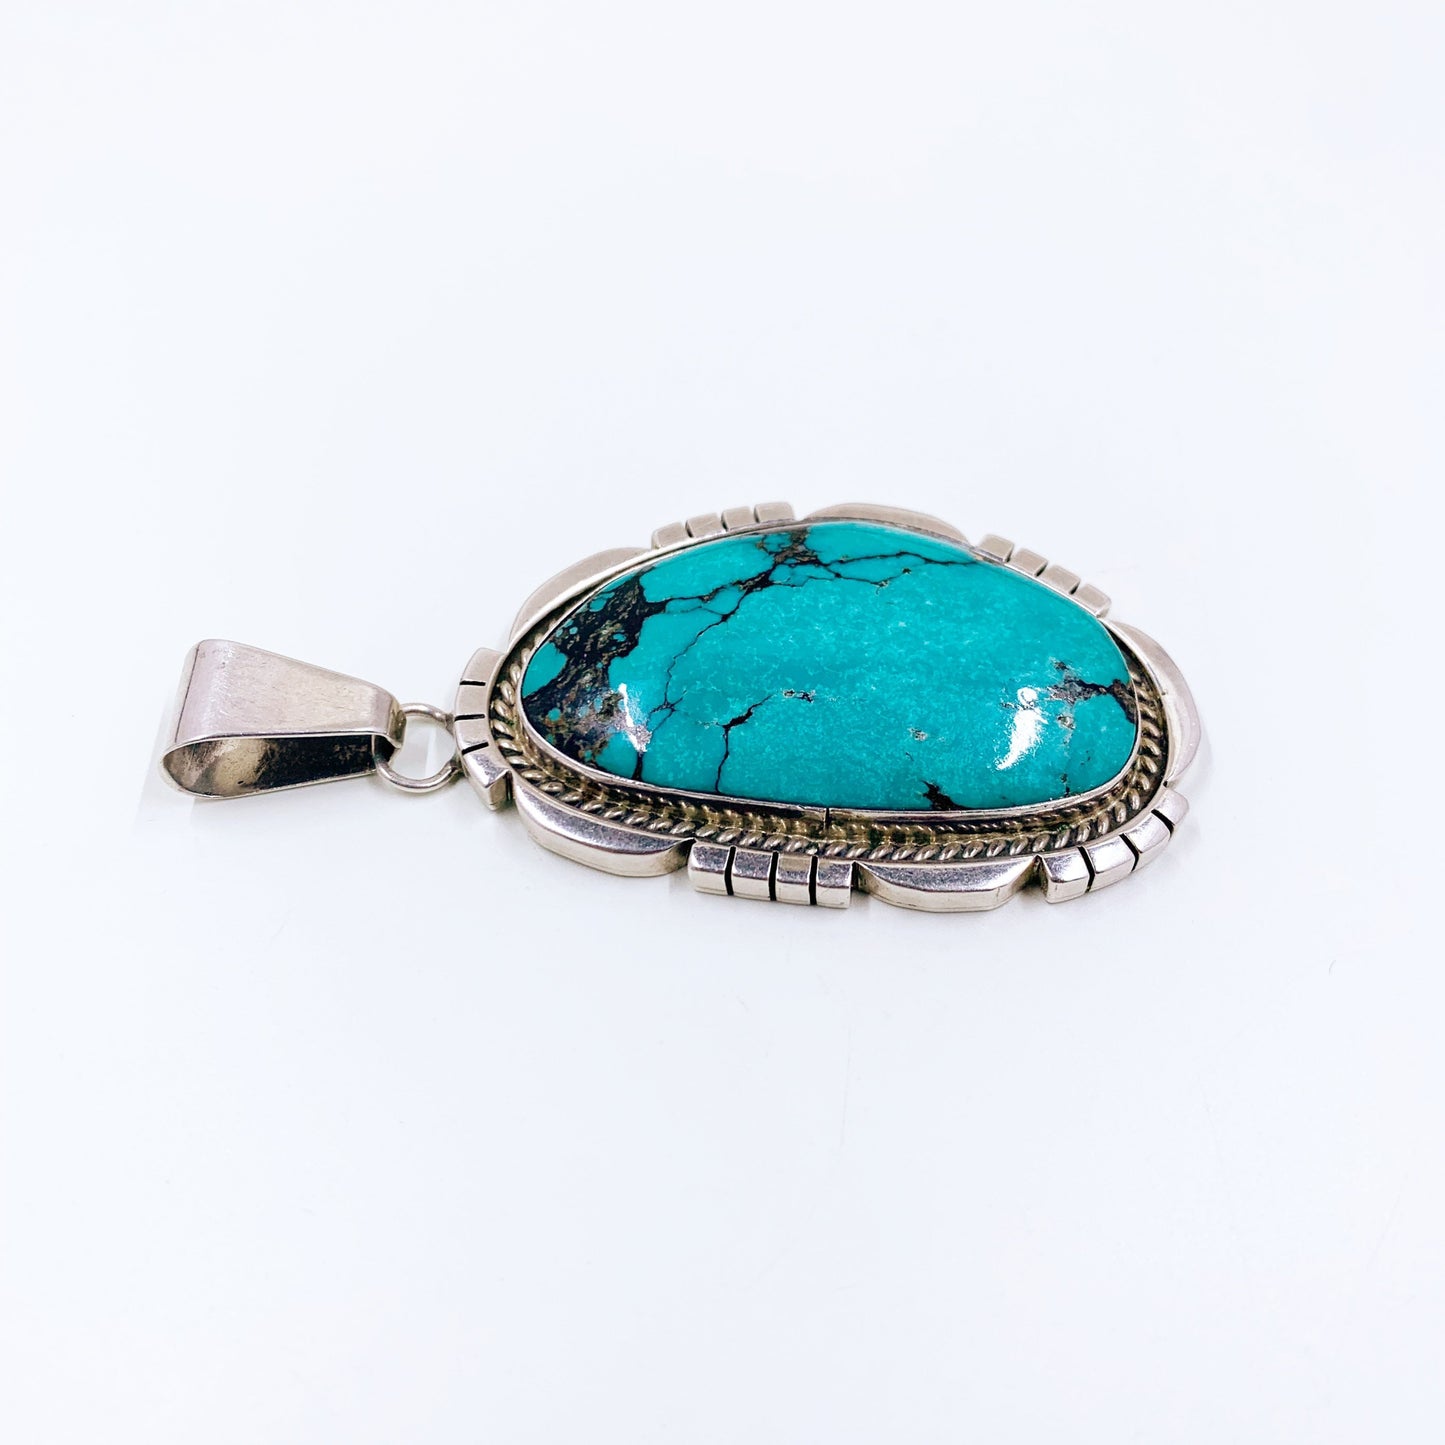 Vintage Navajo Turquoise Pendant by Darrin Livingston  | Large Silver Turquoise Stone Pendant